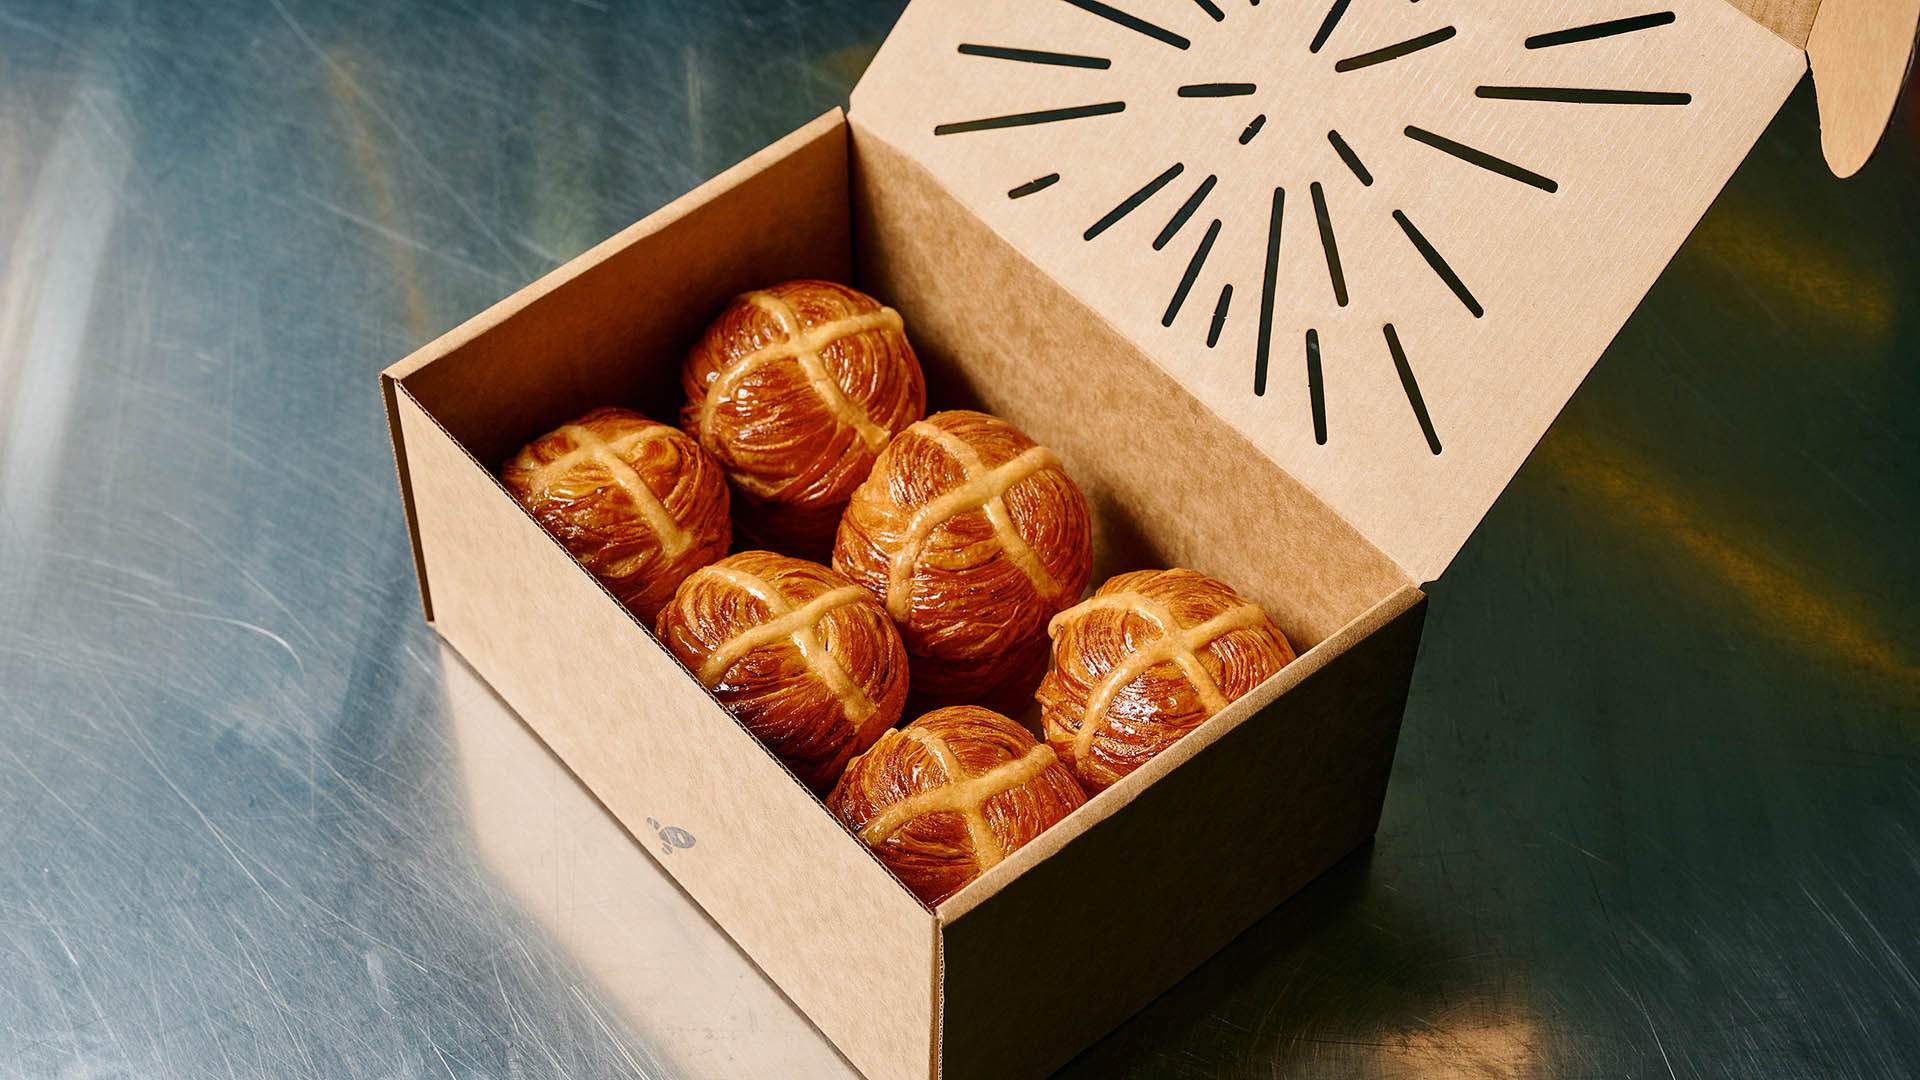 Lune's Highly Sought-After Hot Cross Cruffins Are Returning for Another Delicious Easter